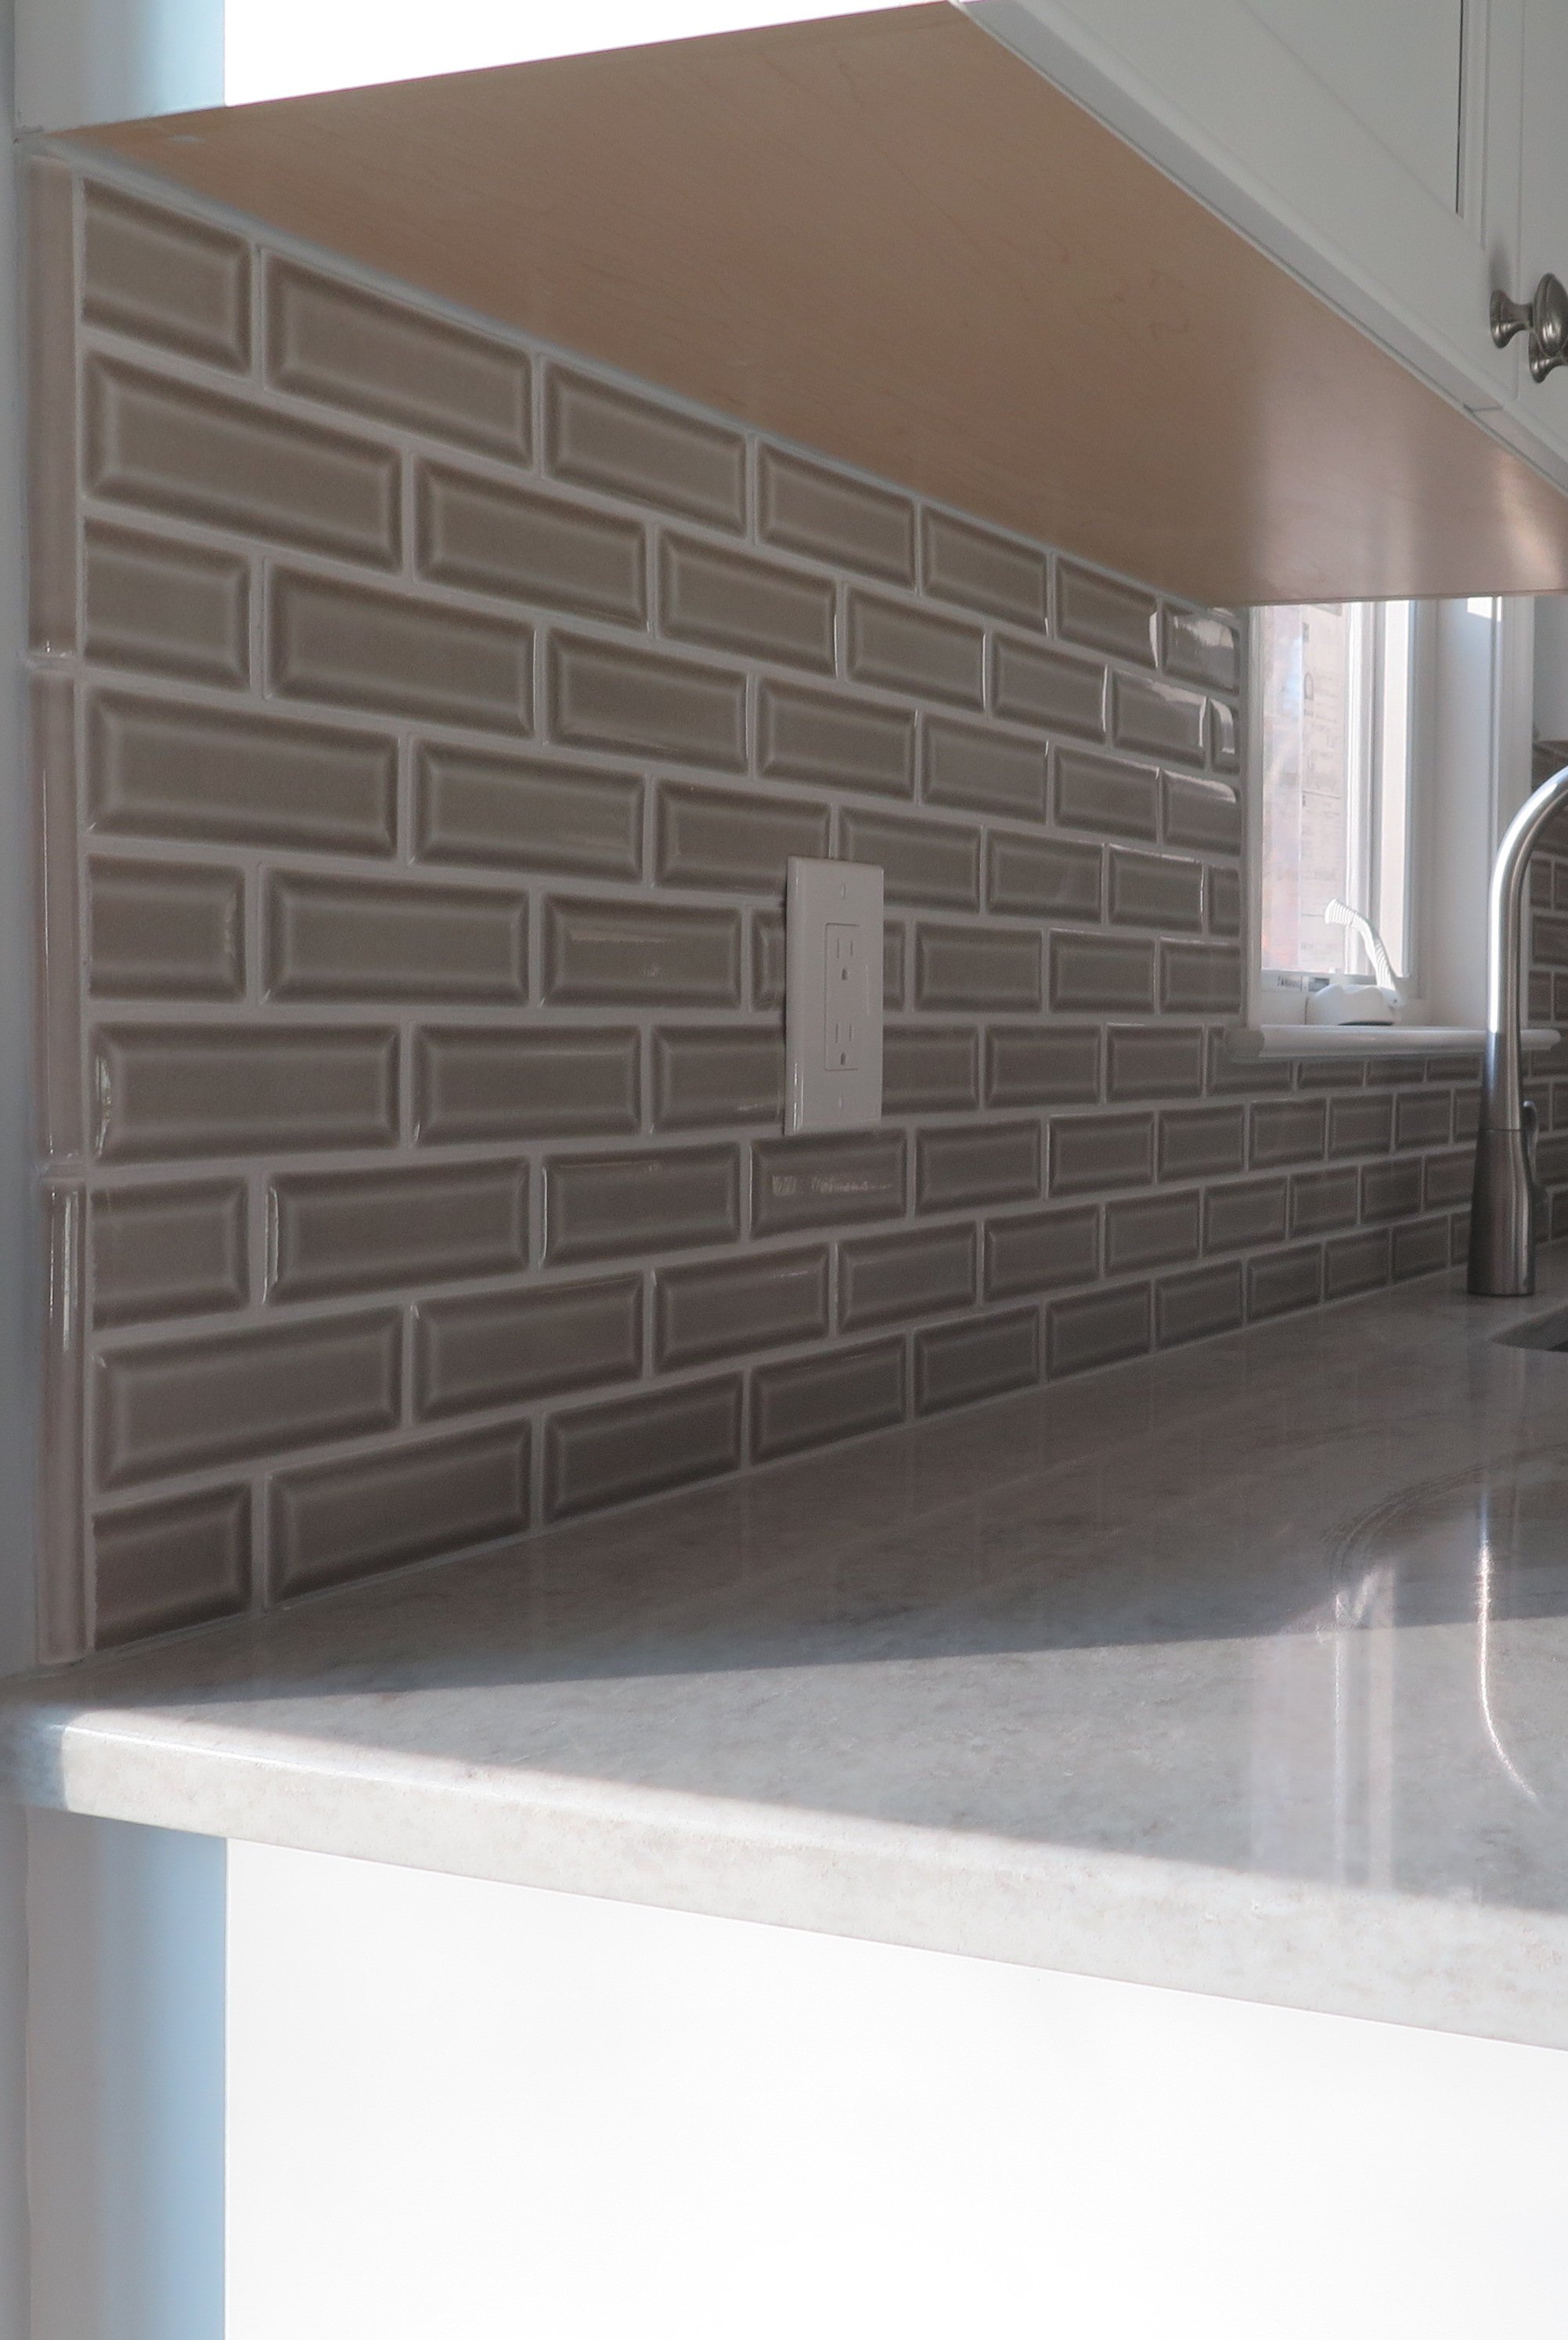 How To Install A Tile Backsplash Monk S Home Improvements In Nj